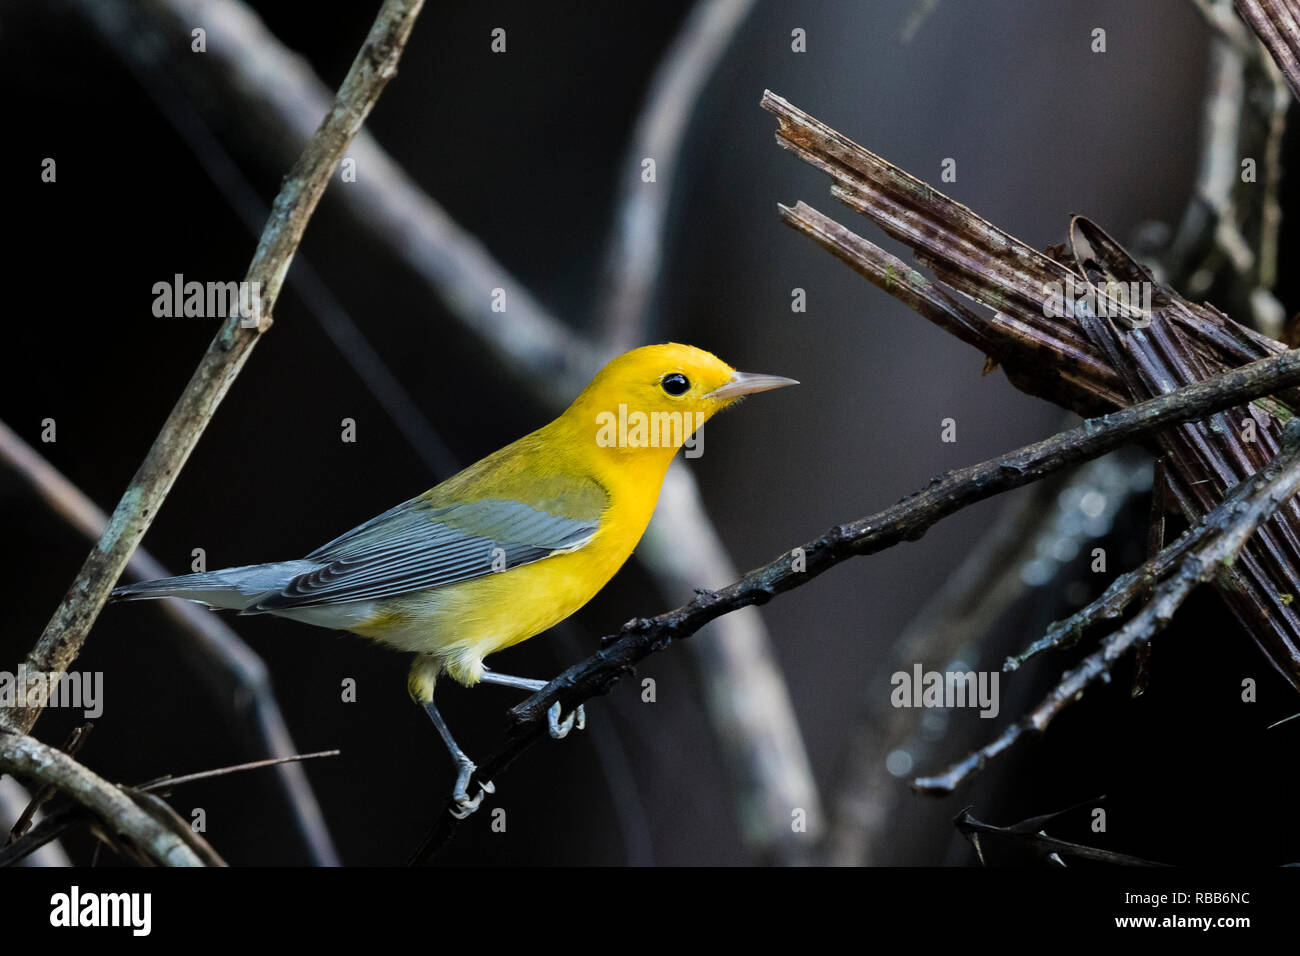 Prothonotary warbler, Tortuguero National Park, Costa Rica Stock Photo